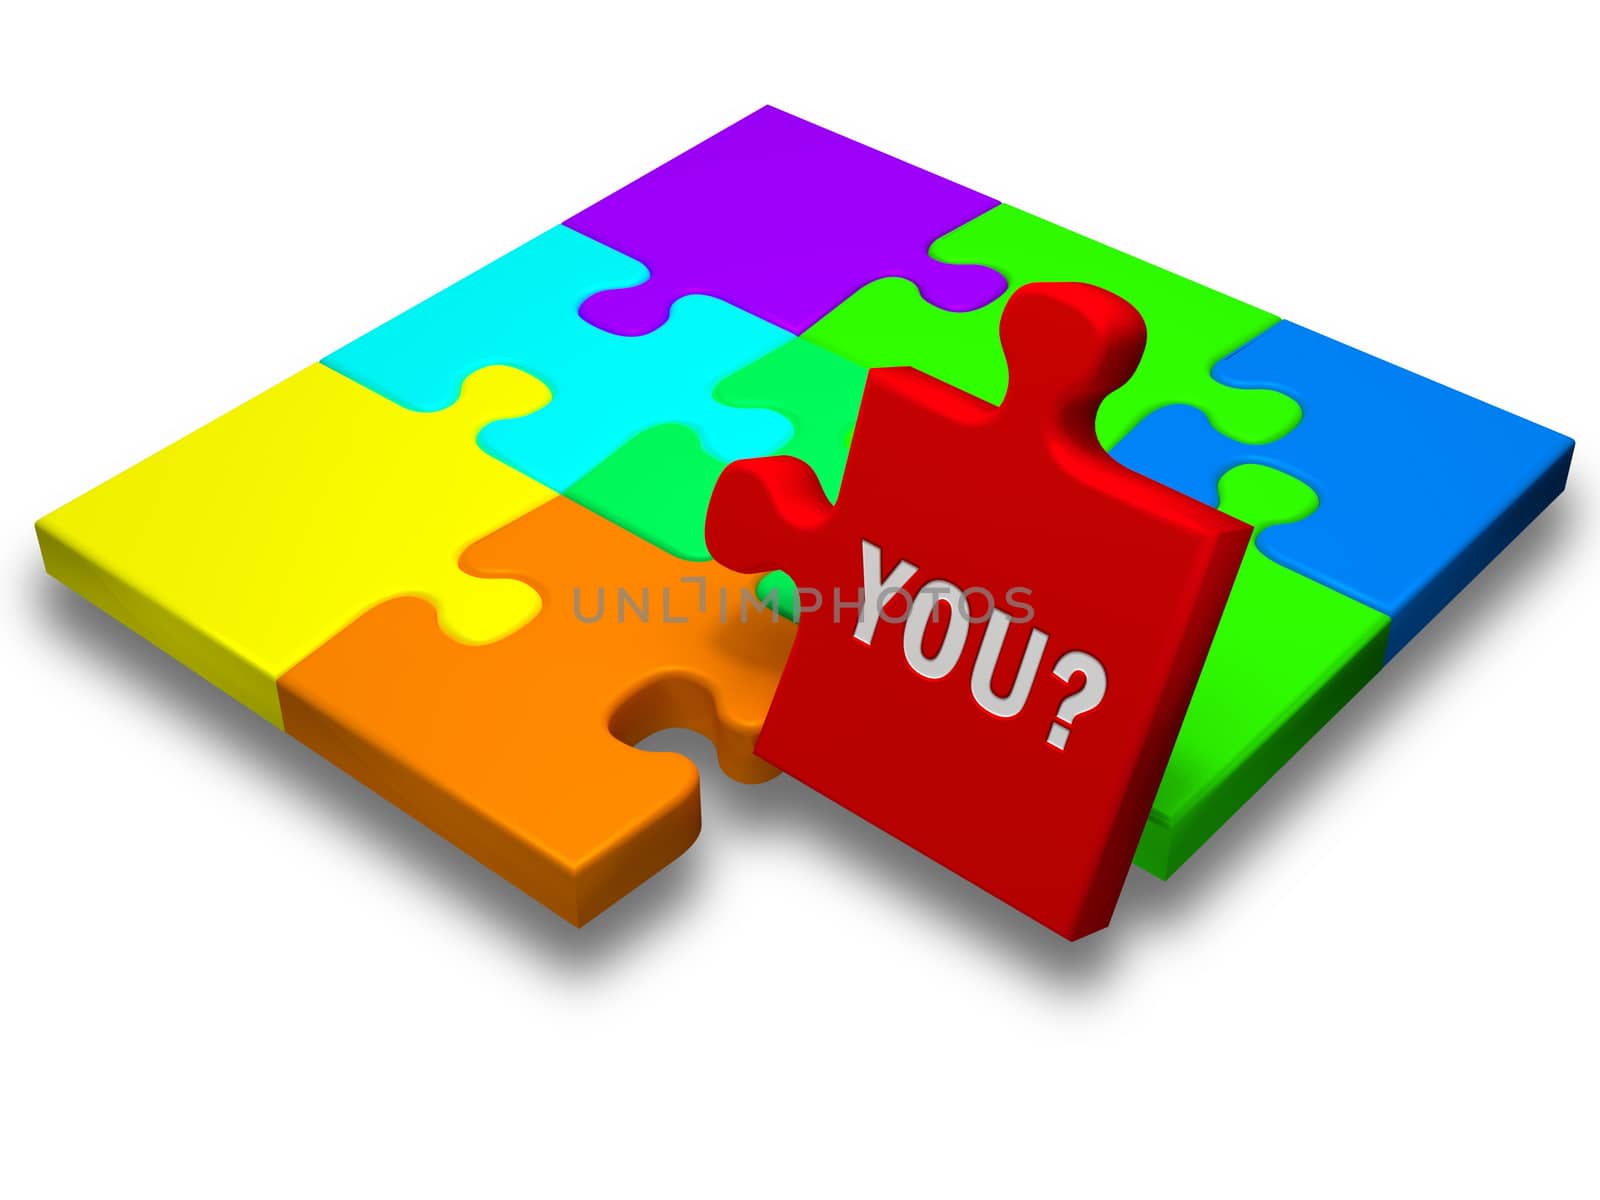 A puzzle with a piece elevated containing the text "You?". Are "you" the one that fit in our organization?